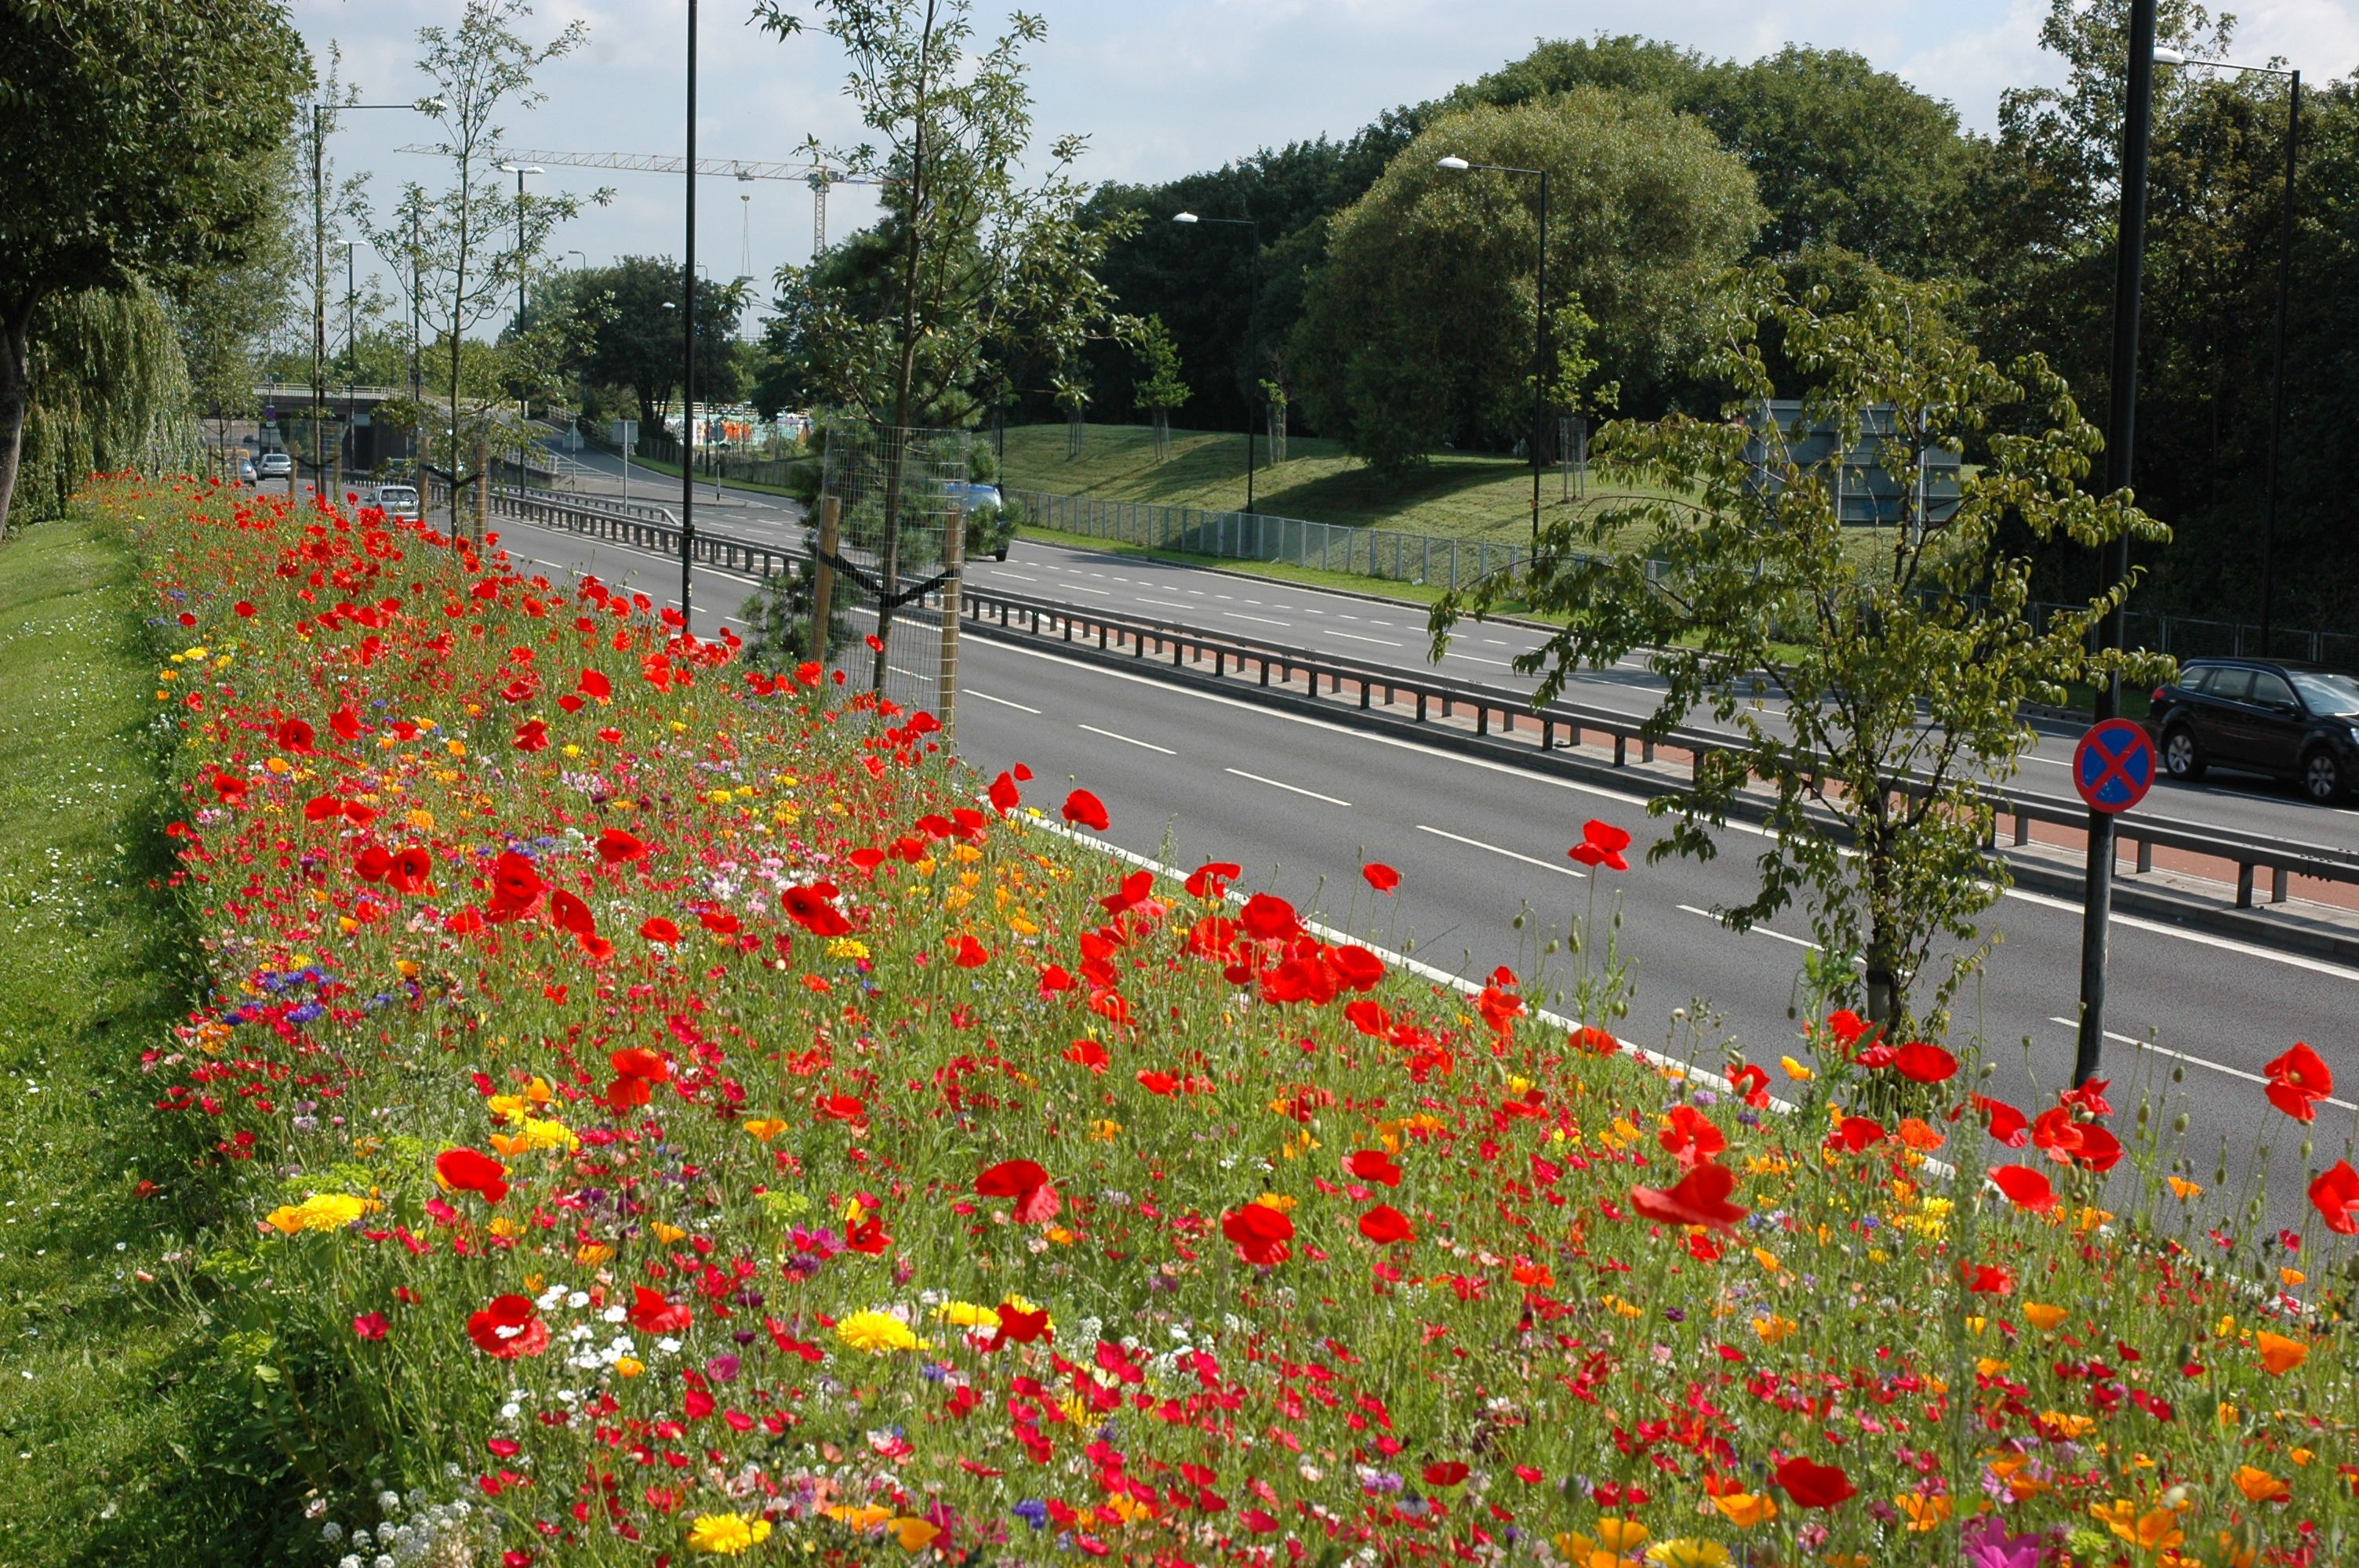 Road Verge Planted with A Mix of Flower Species.